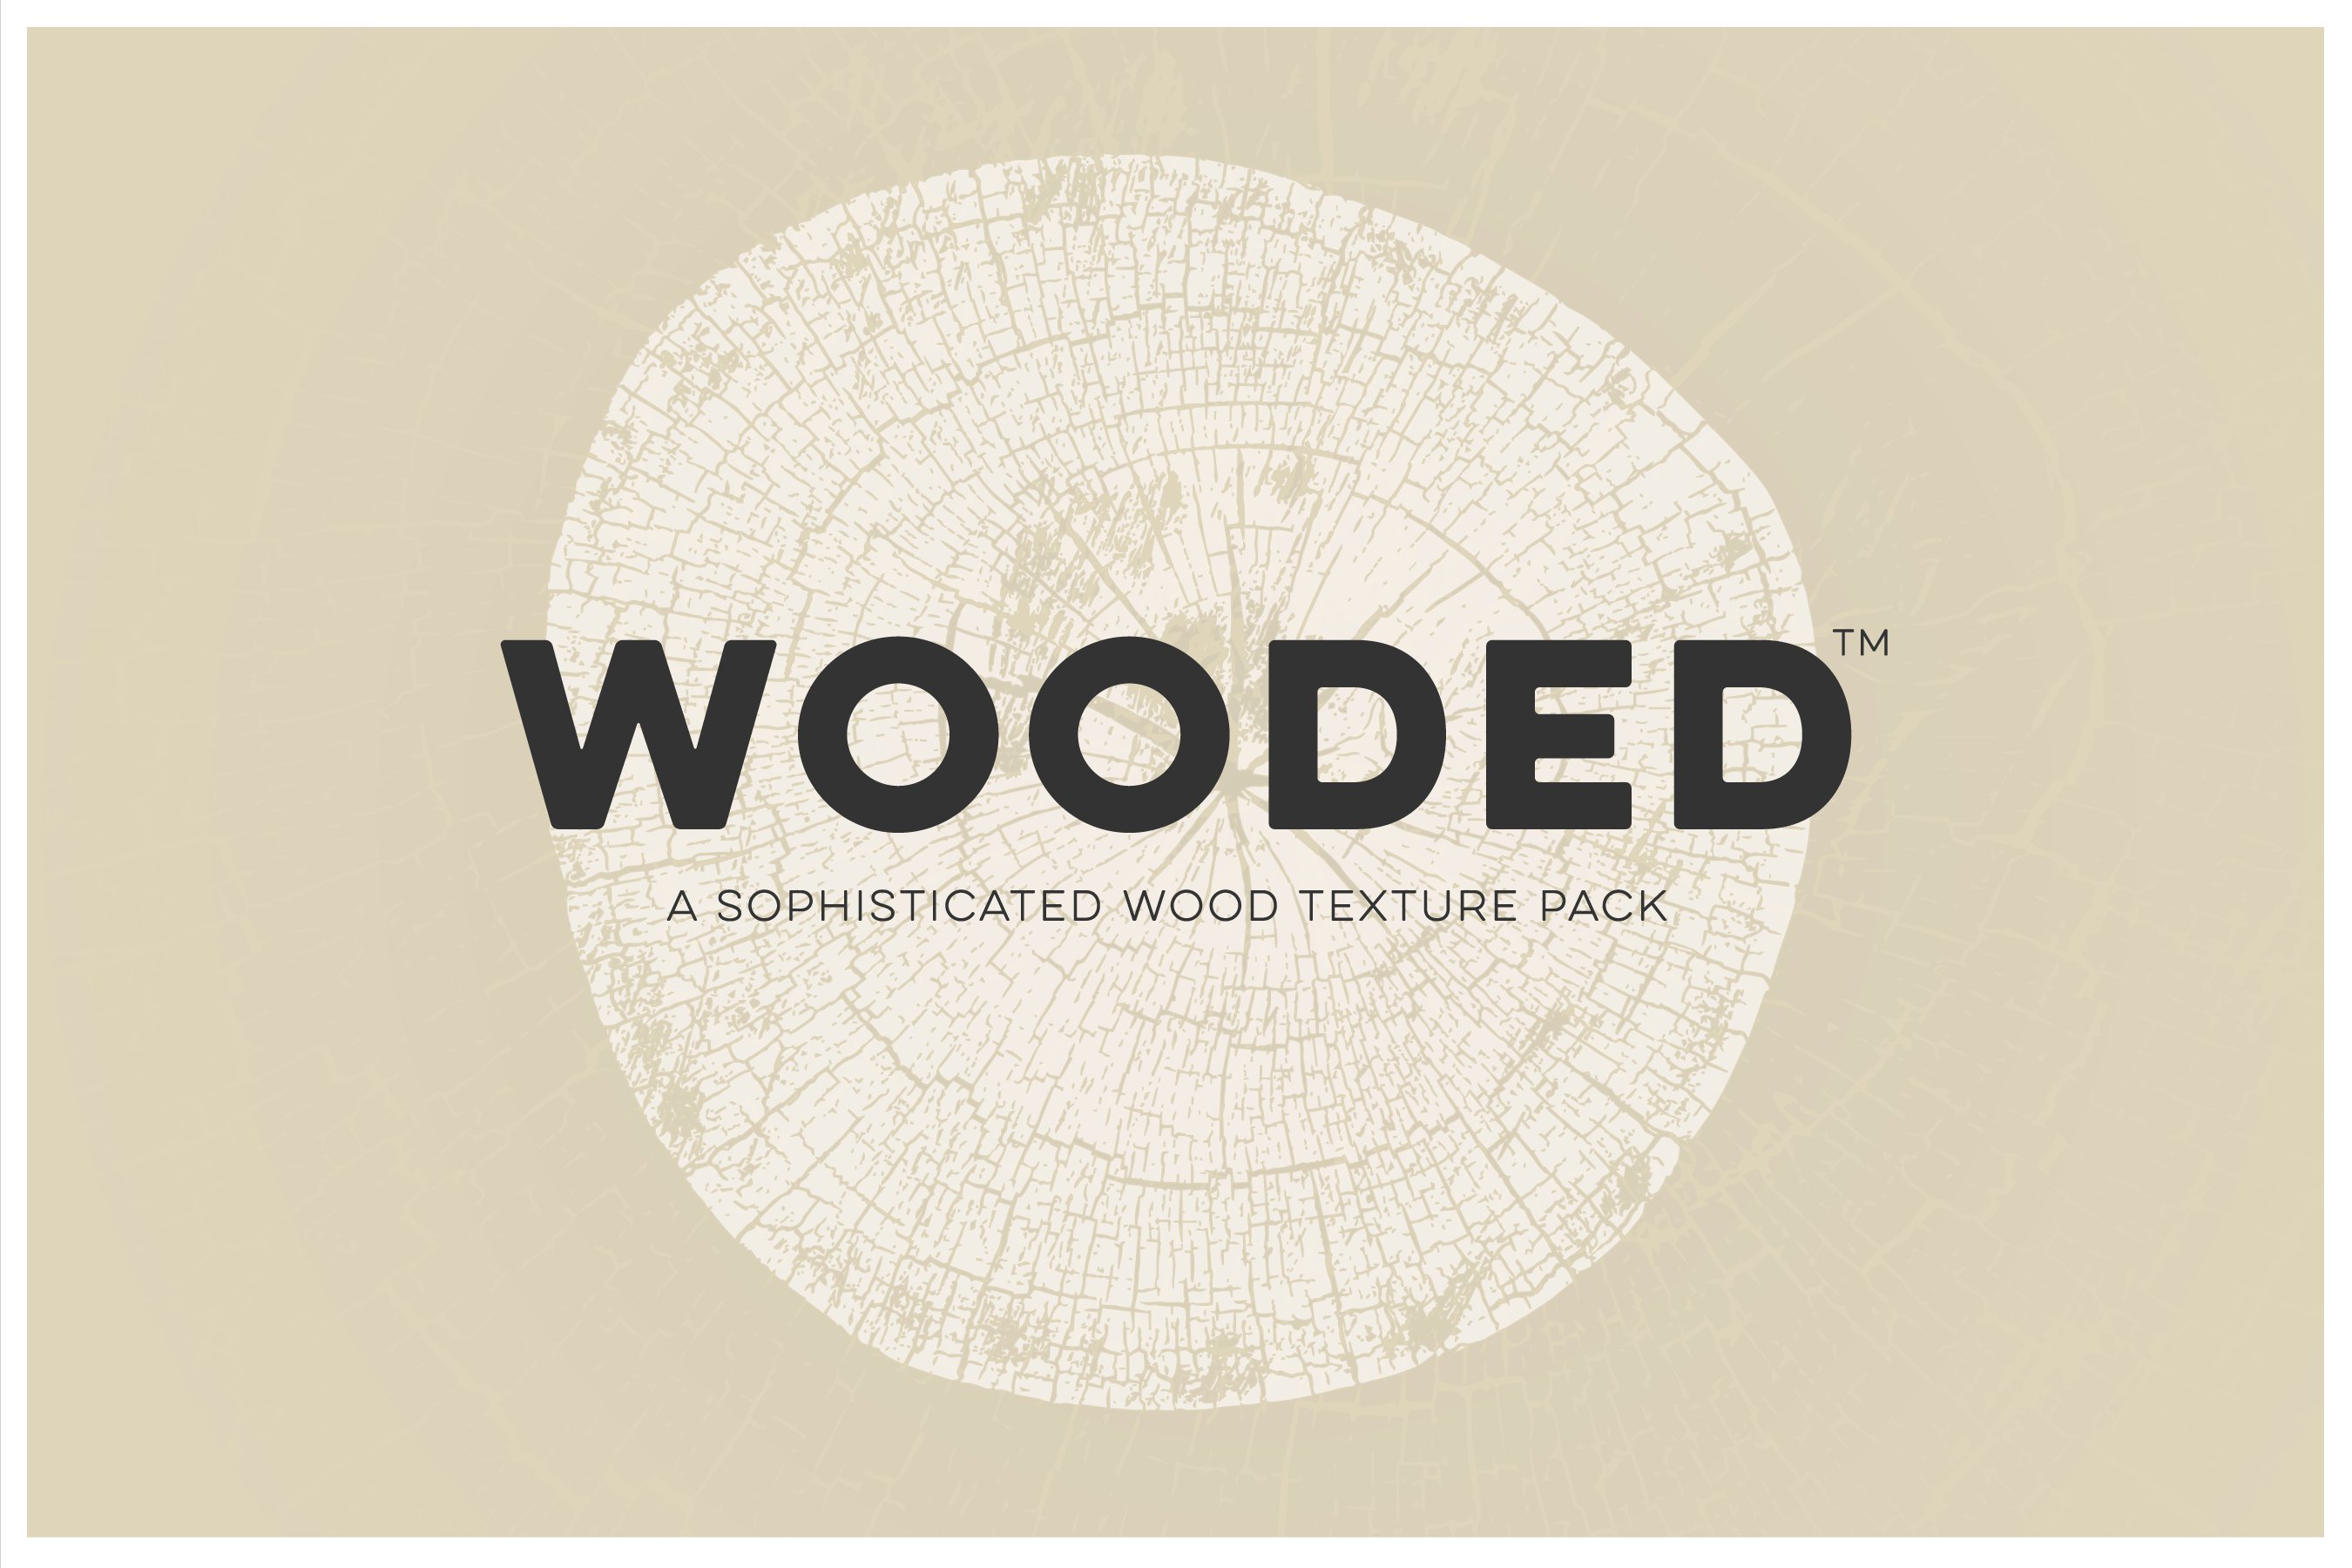 WOODED - Wood Log Grain Texture Pack cover image.